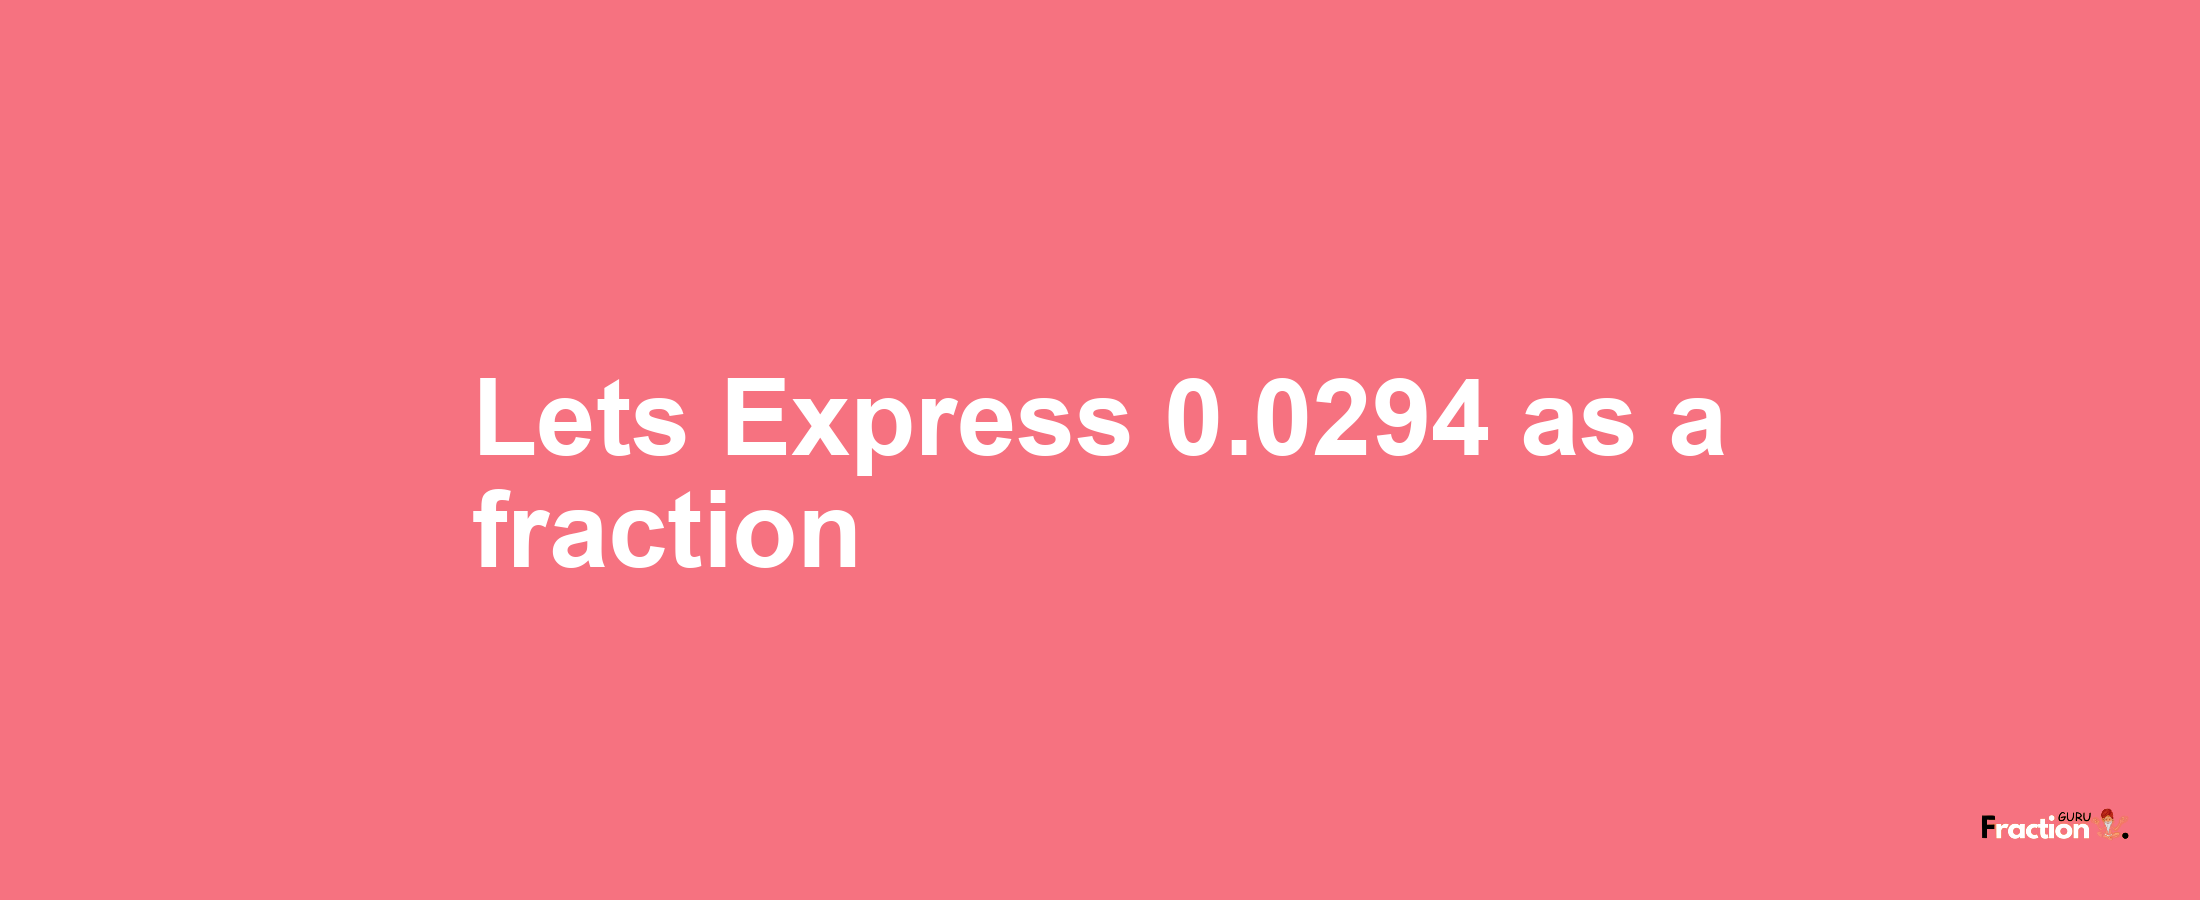 Lets Express 0.0294 as afraction